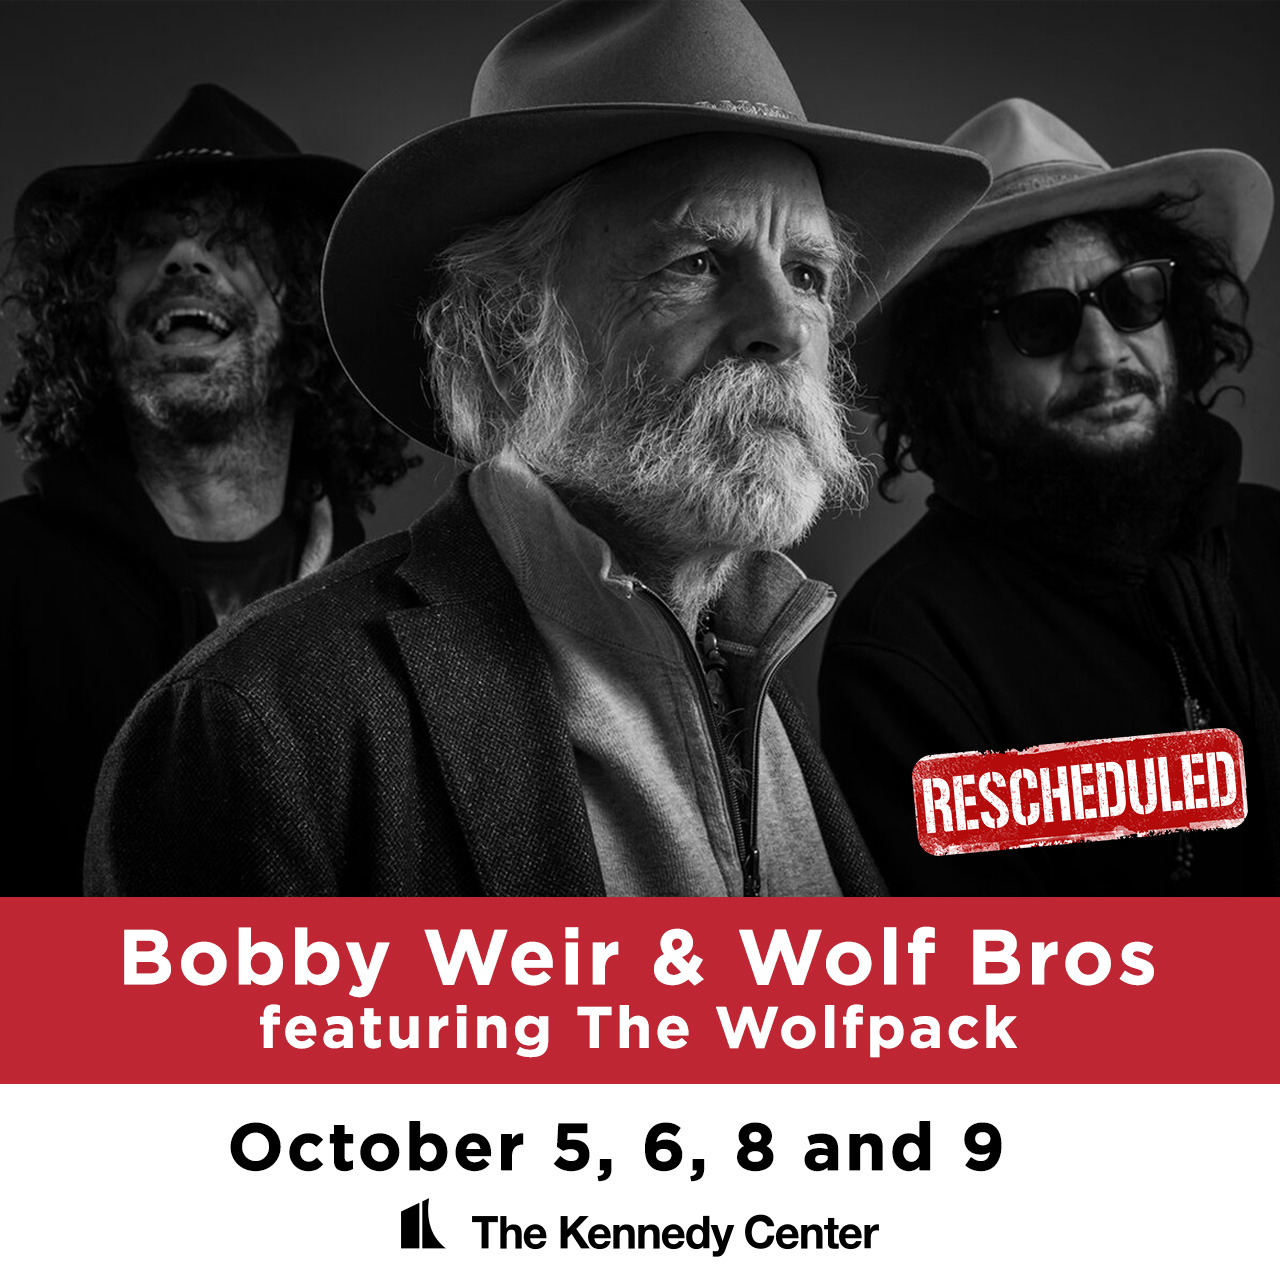 Bobby Weir & Wolf Bros National Symphony Orchestra Performances Postponed to October 2022